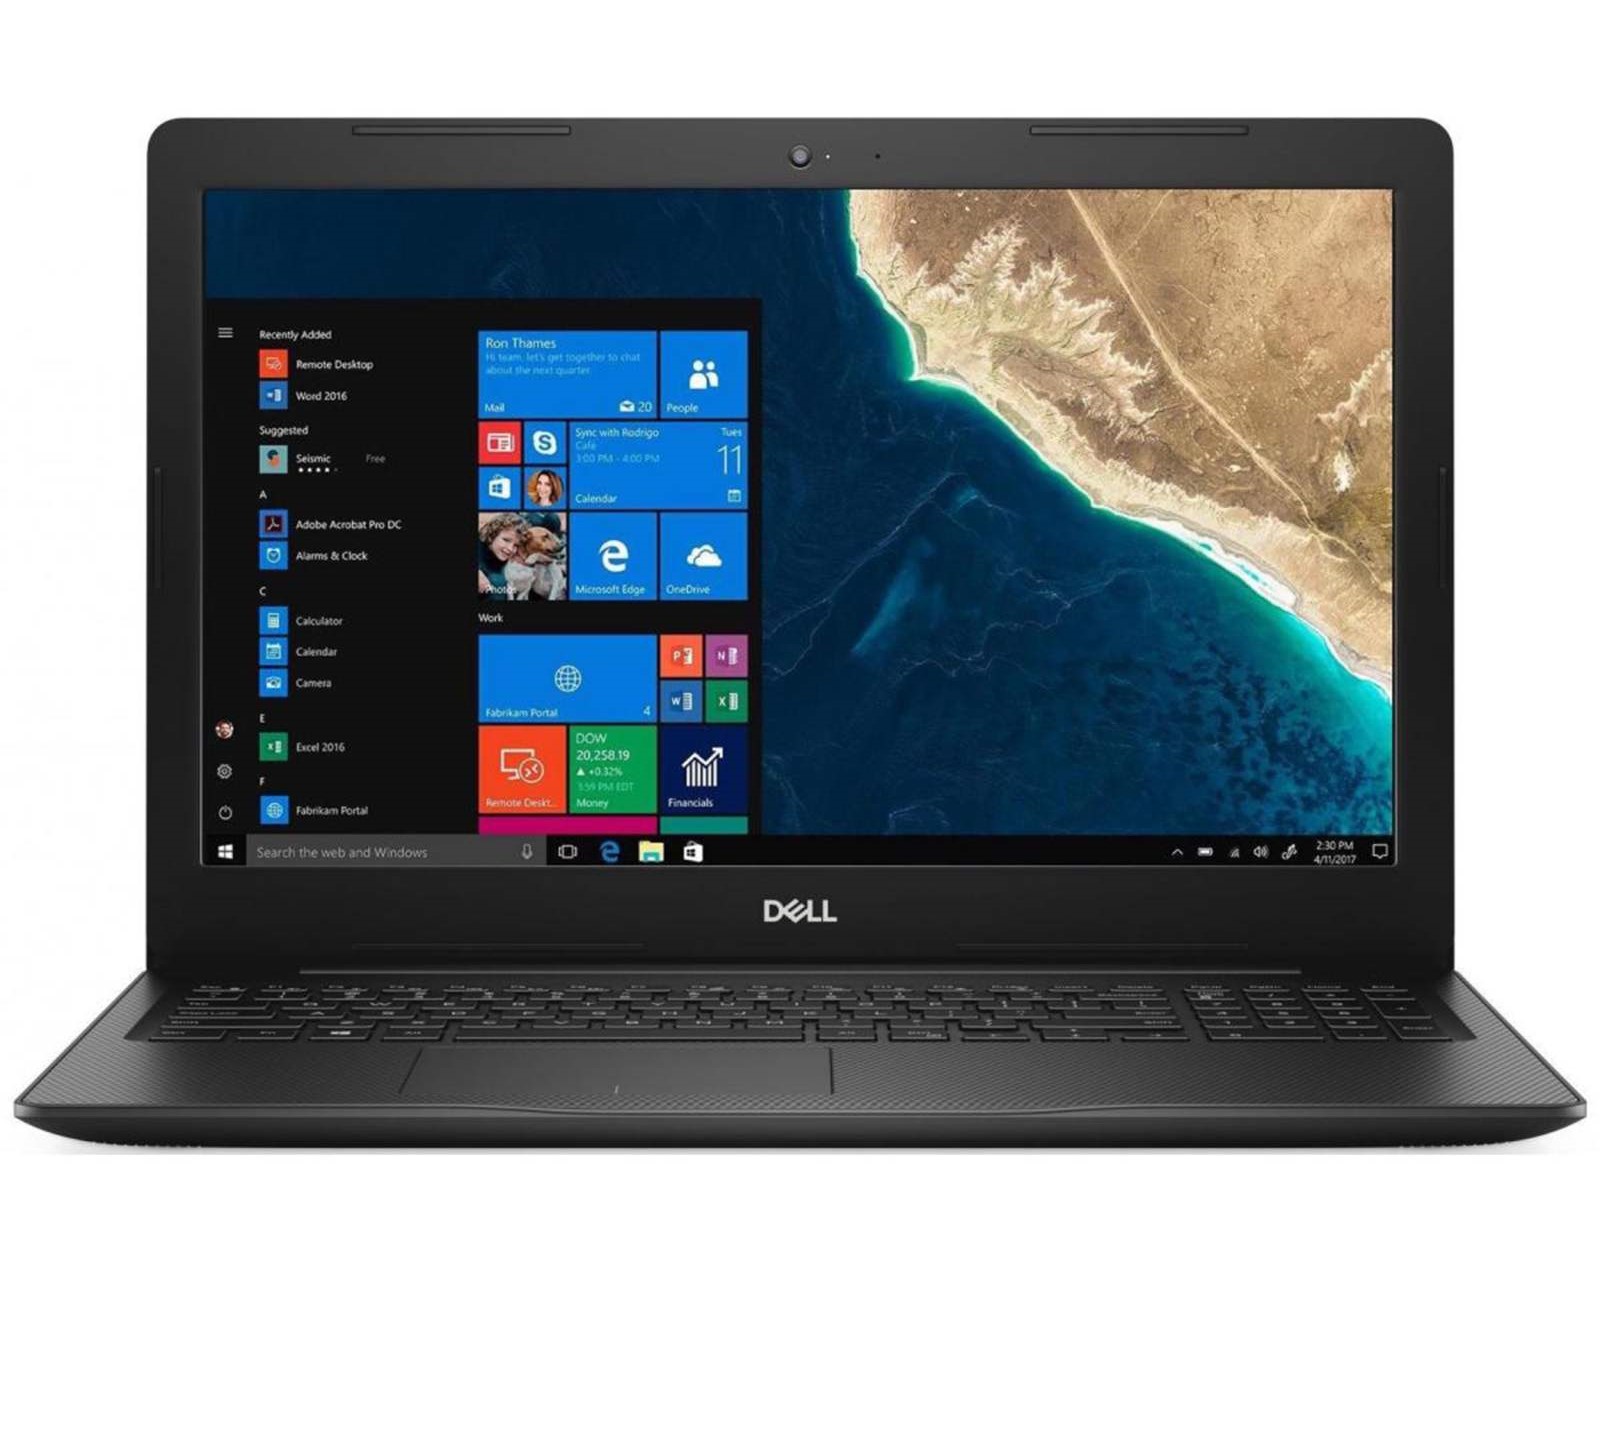 Dell Inspiron 3580 - D - 15 inch Laptop